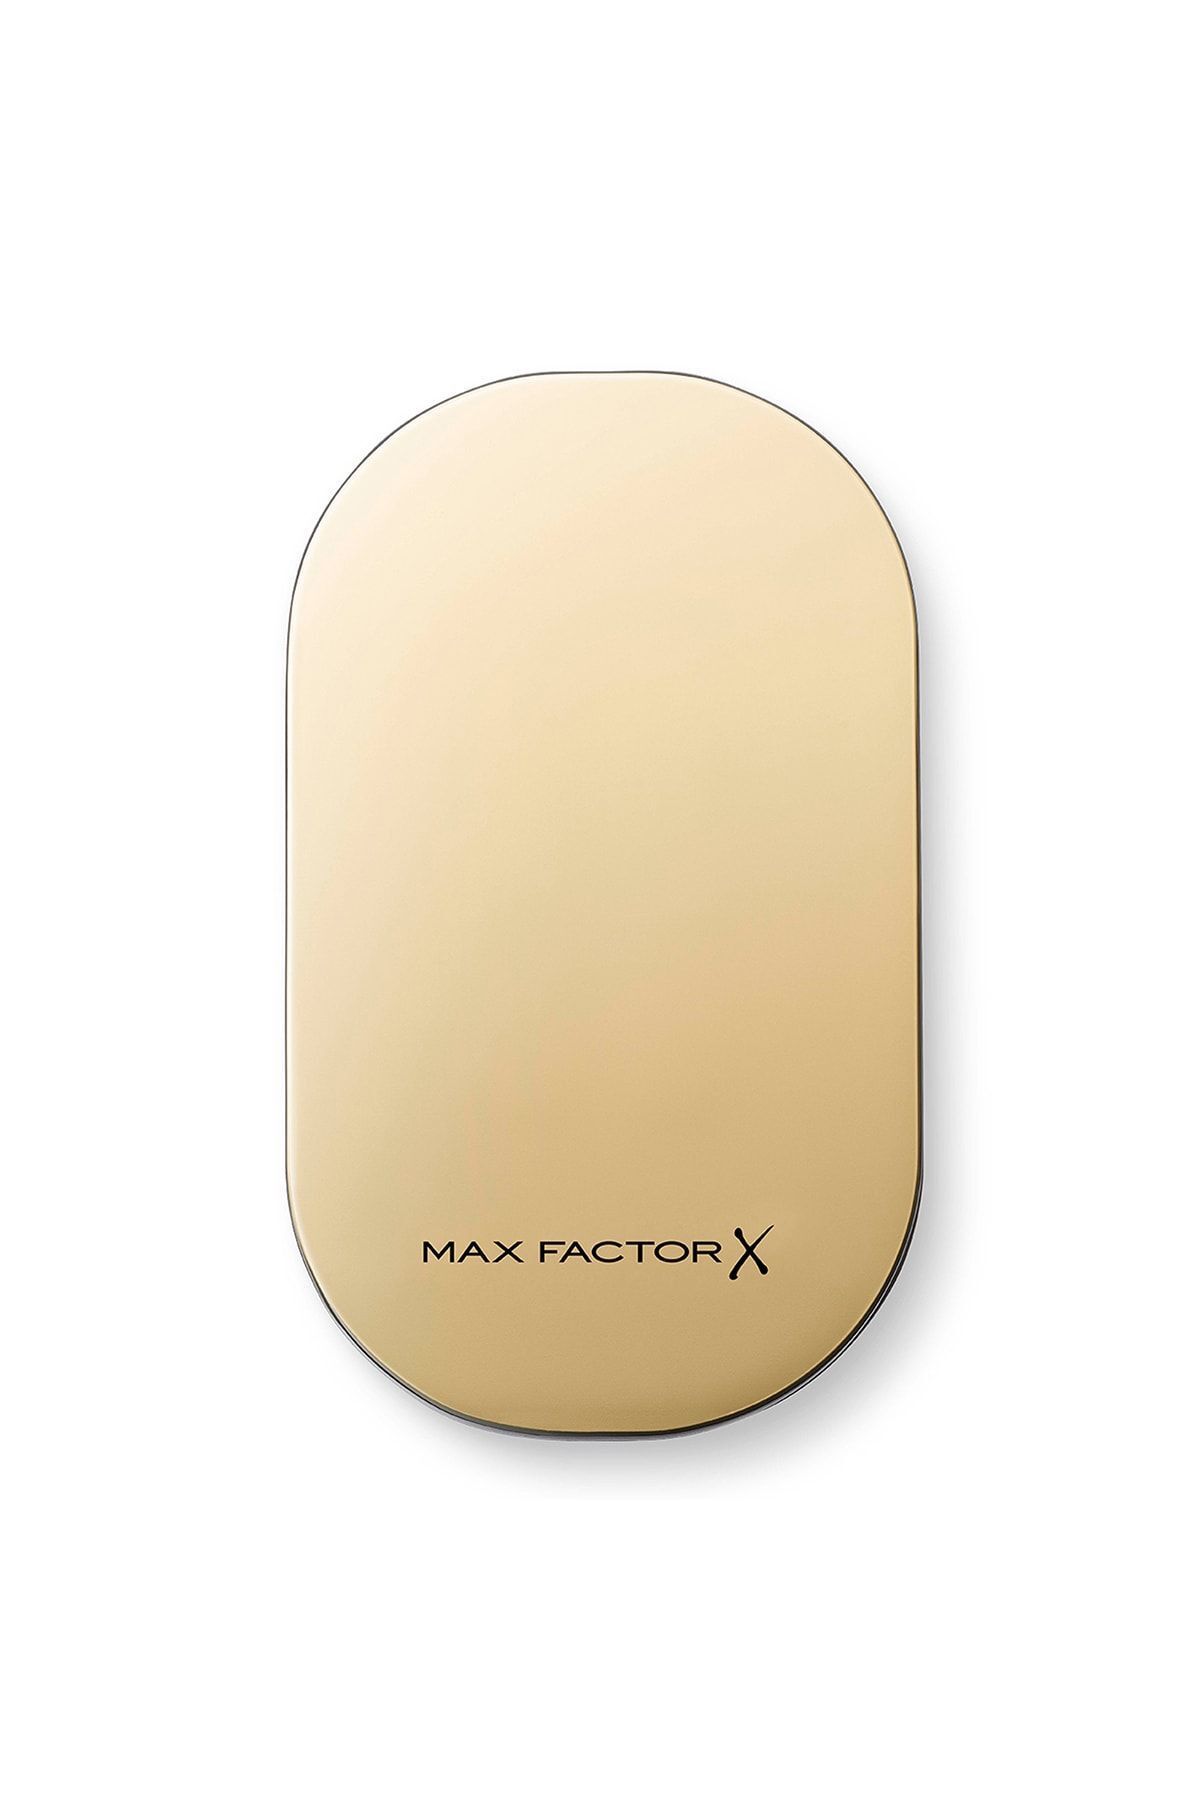 Max Factor Pudra Facefinity Compact Powder 008 Toffee